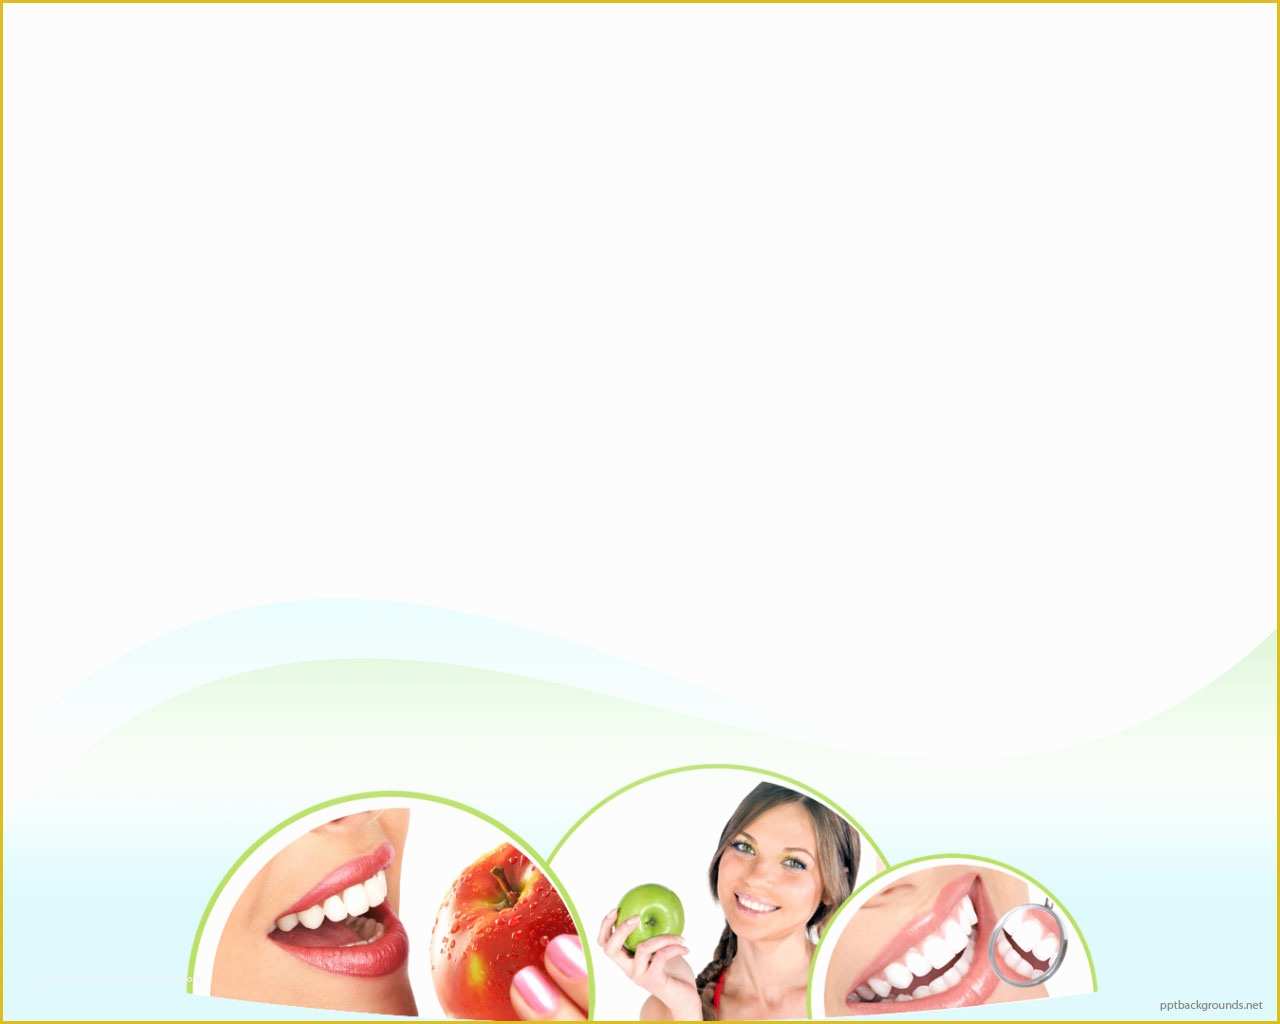 Free Dental Templates Of oral and Dental Health Backgrounds for Powerpoint Health